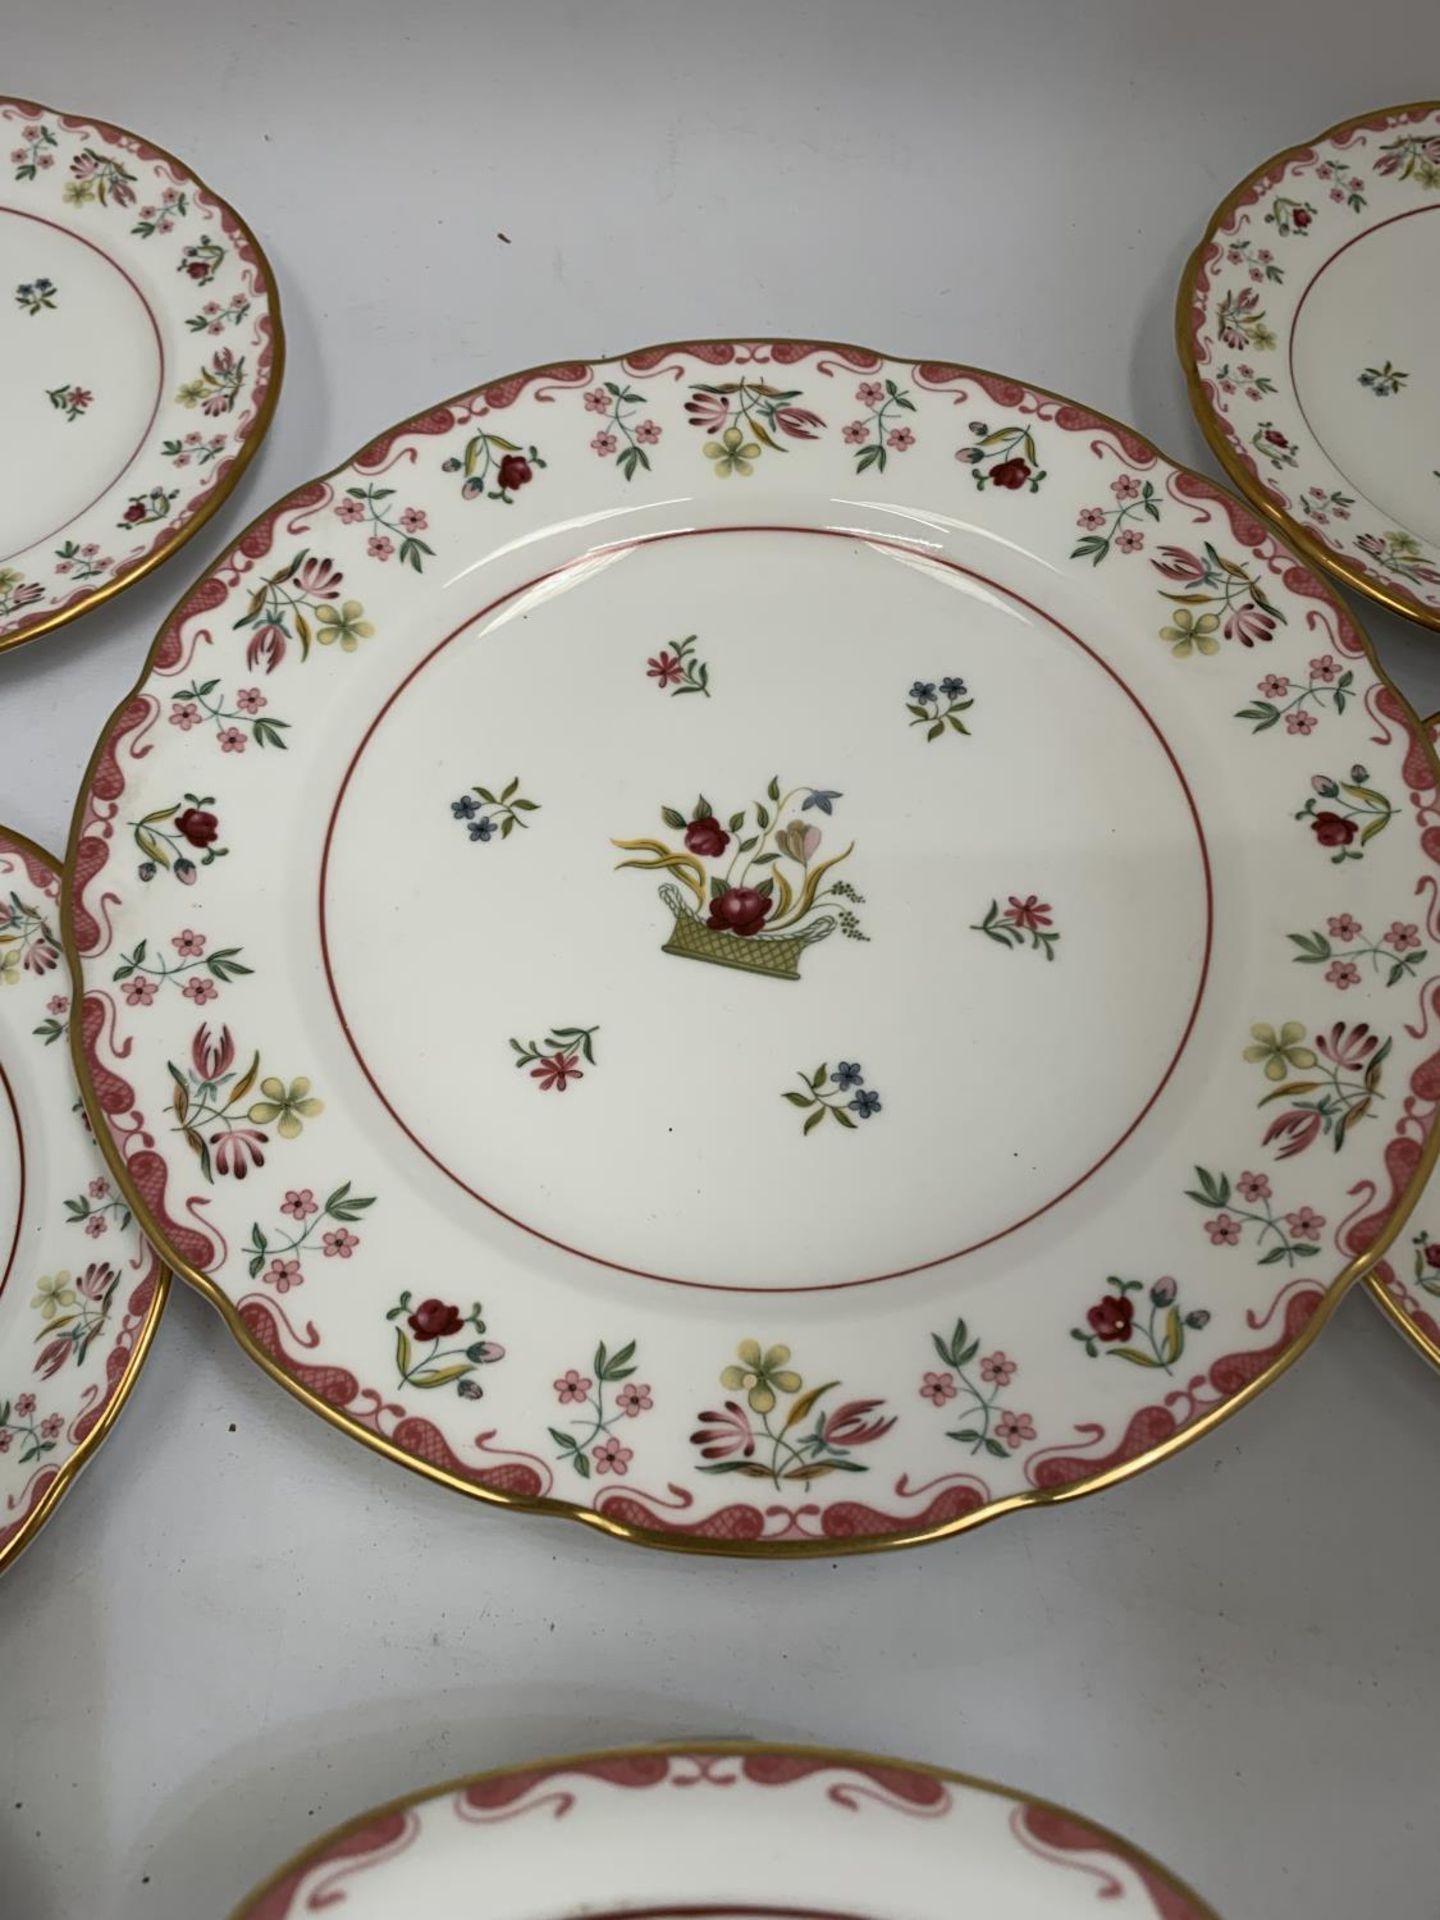 A QUANTITY OF WEDGWOOD 'BIANCA' TO INCLUDE A CAKE PLATE, SIDE PLATES, CREAM JUG AND SUGAR BOWL - Image 4 of 6